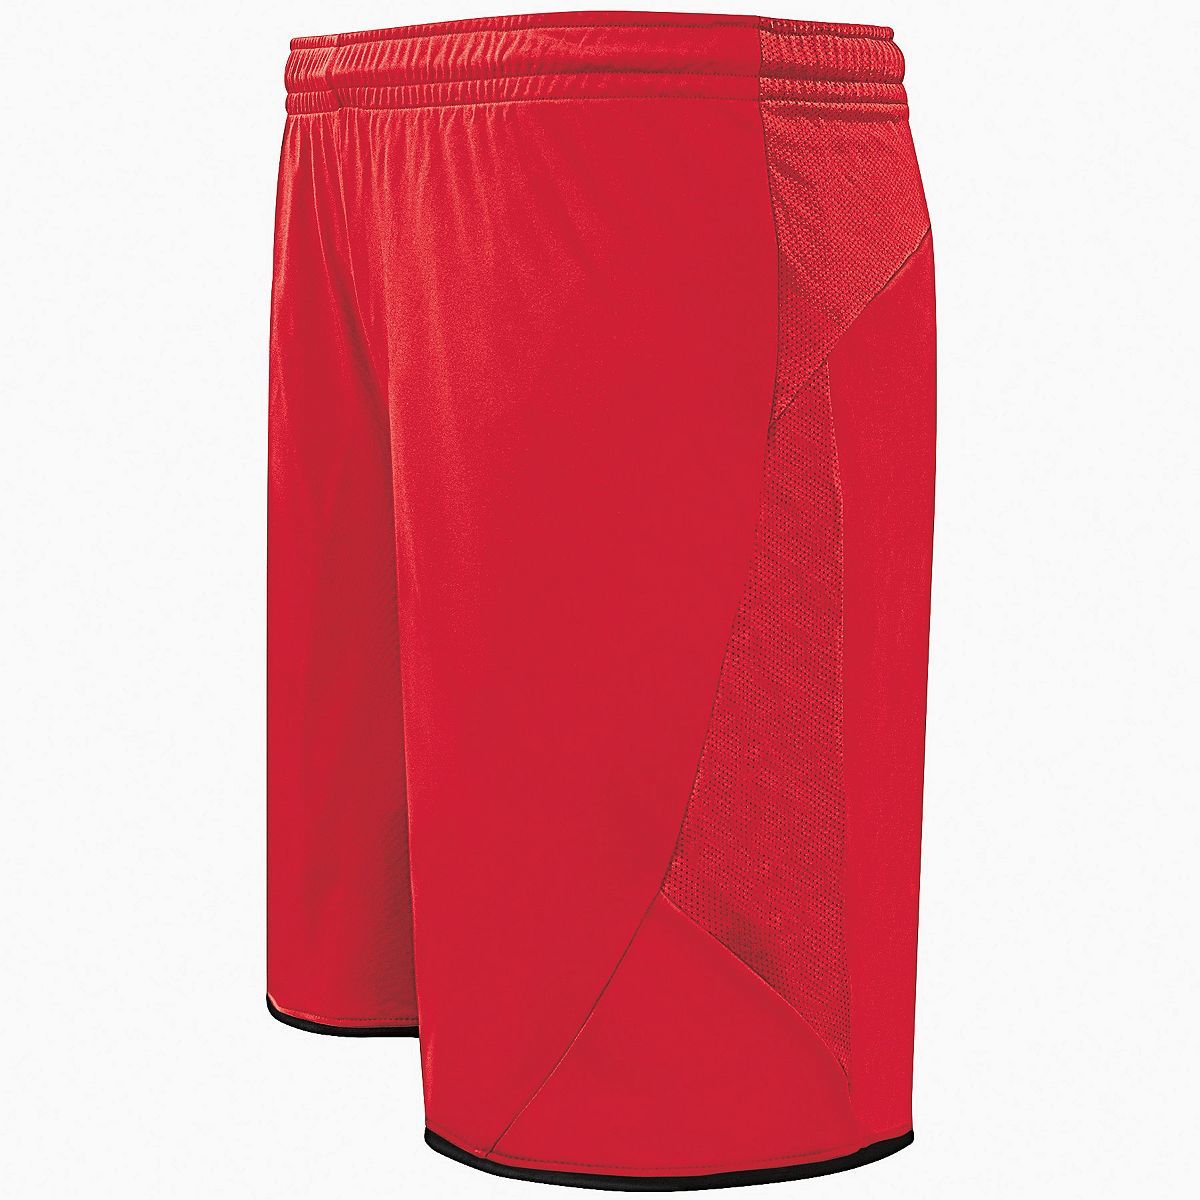 High 5 Youth Club Shorts in Scarlet/Black  -Part of the Youth, Youth-Shorts, High5-Products, Soccer, All-Sports-1 product lines at KanaleyCreations.com